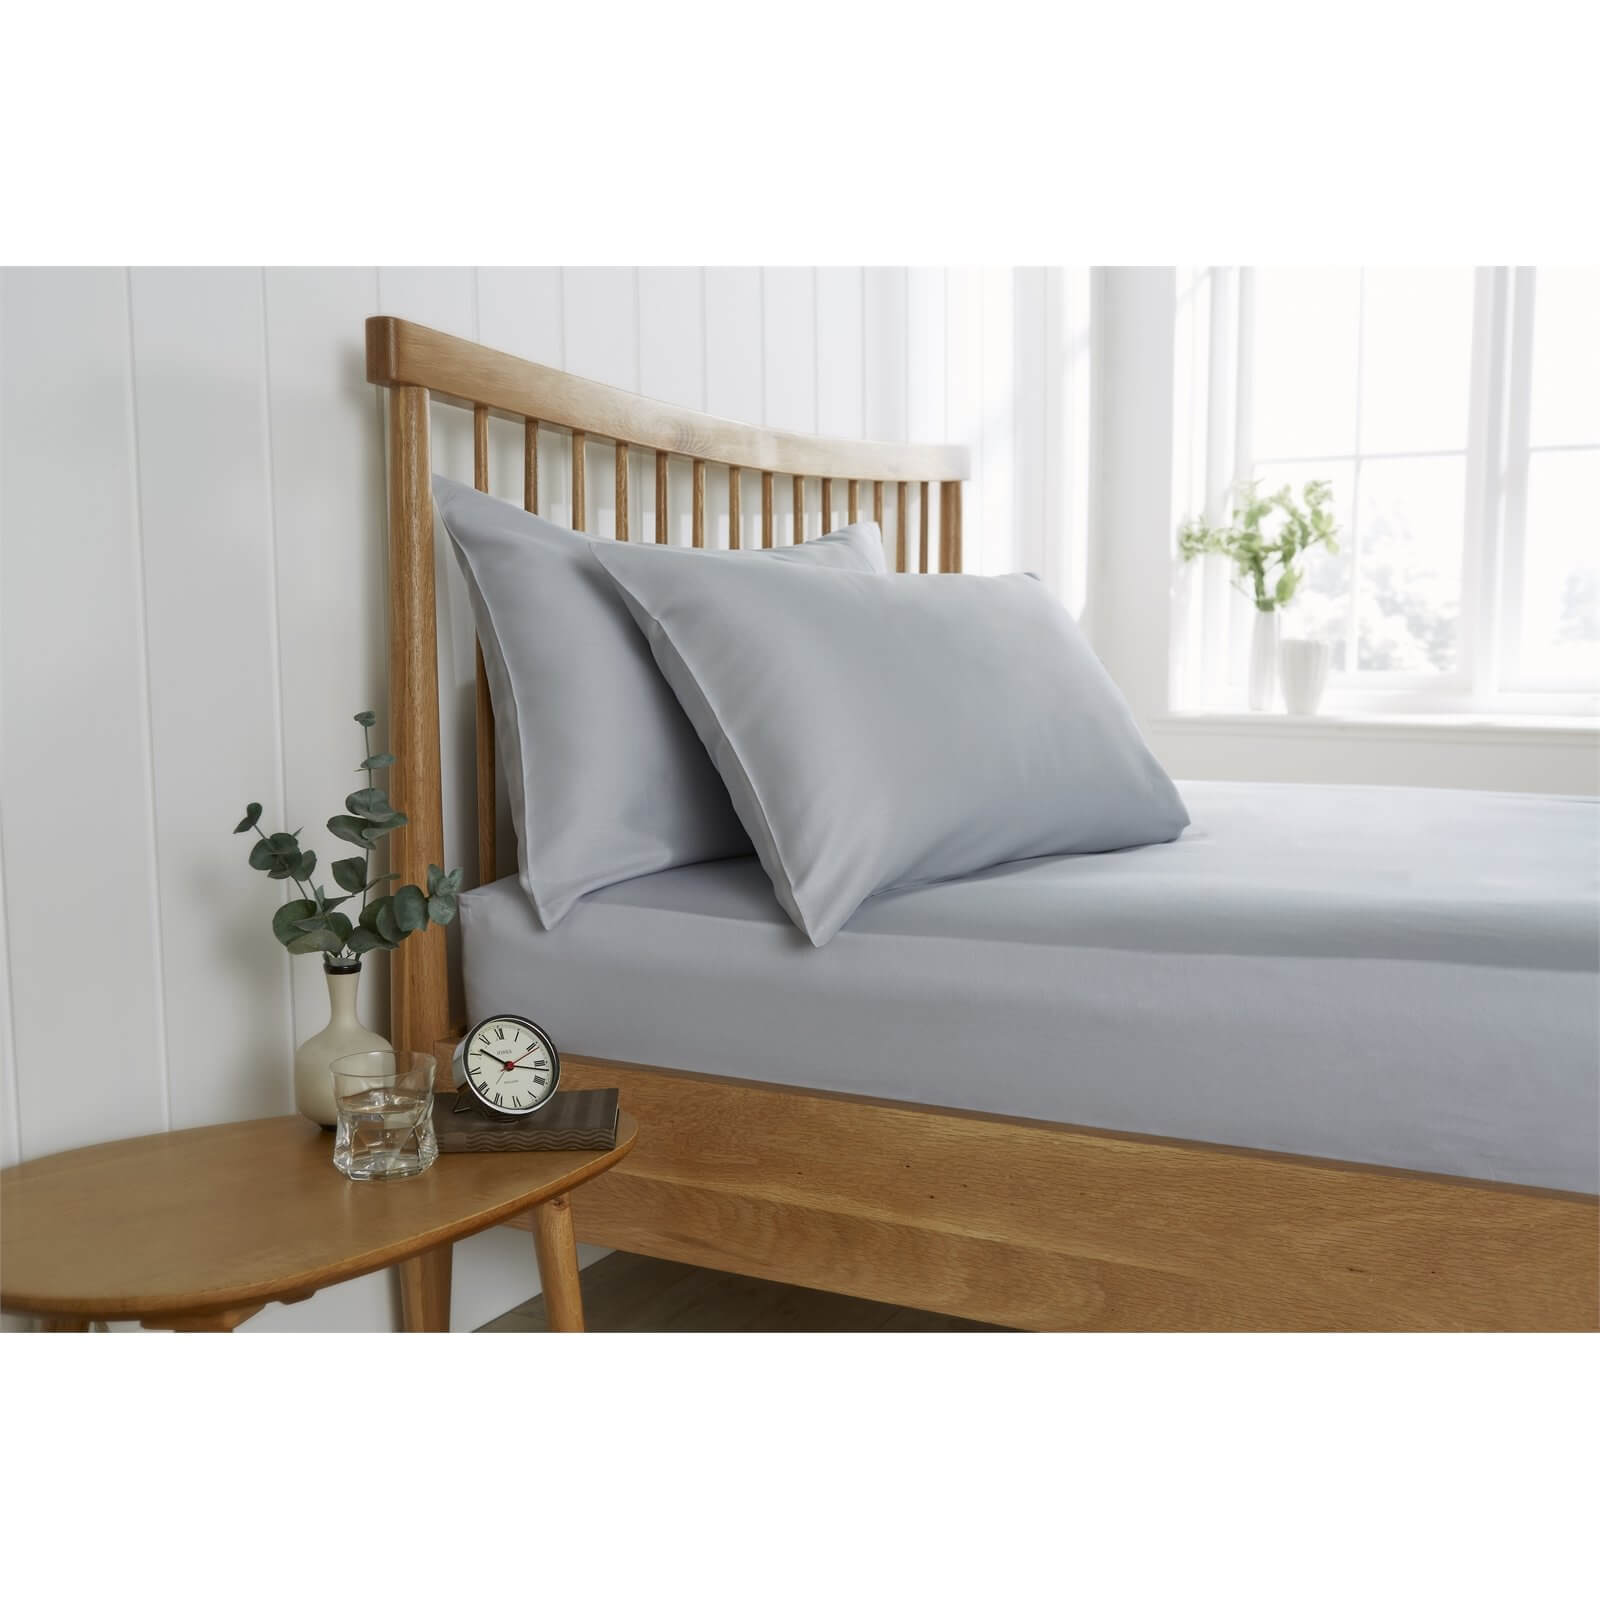 Behrens King Fitted Sheet - Grey